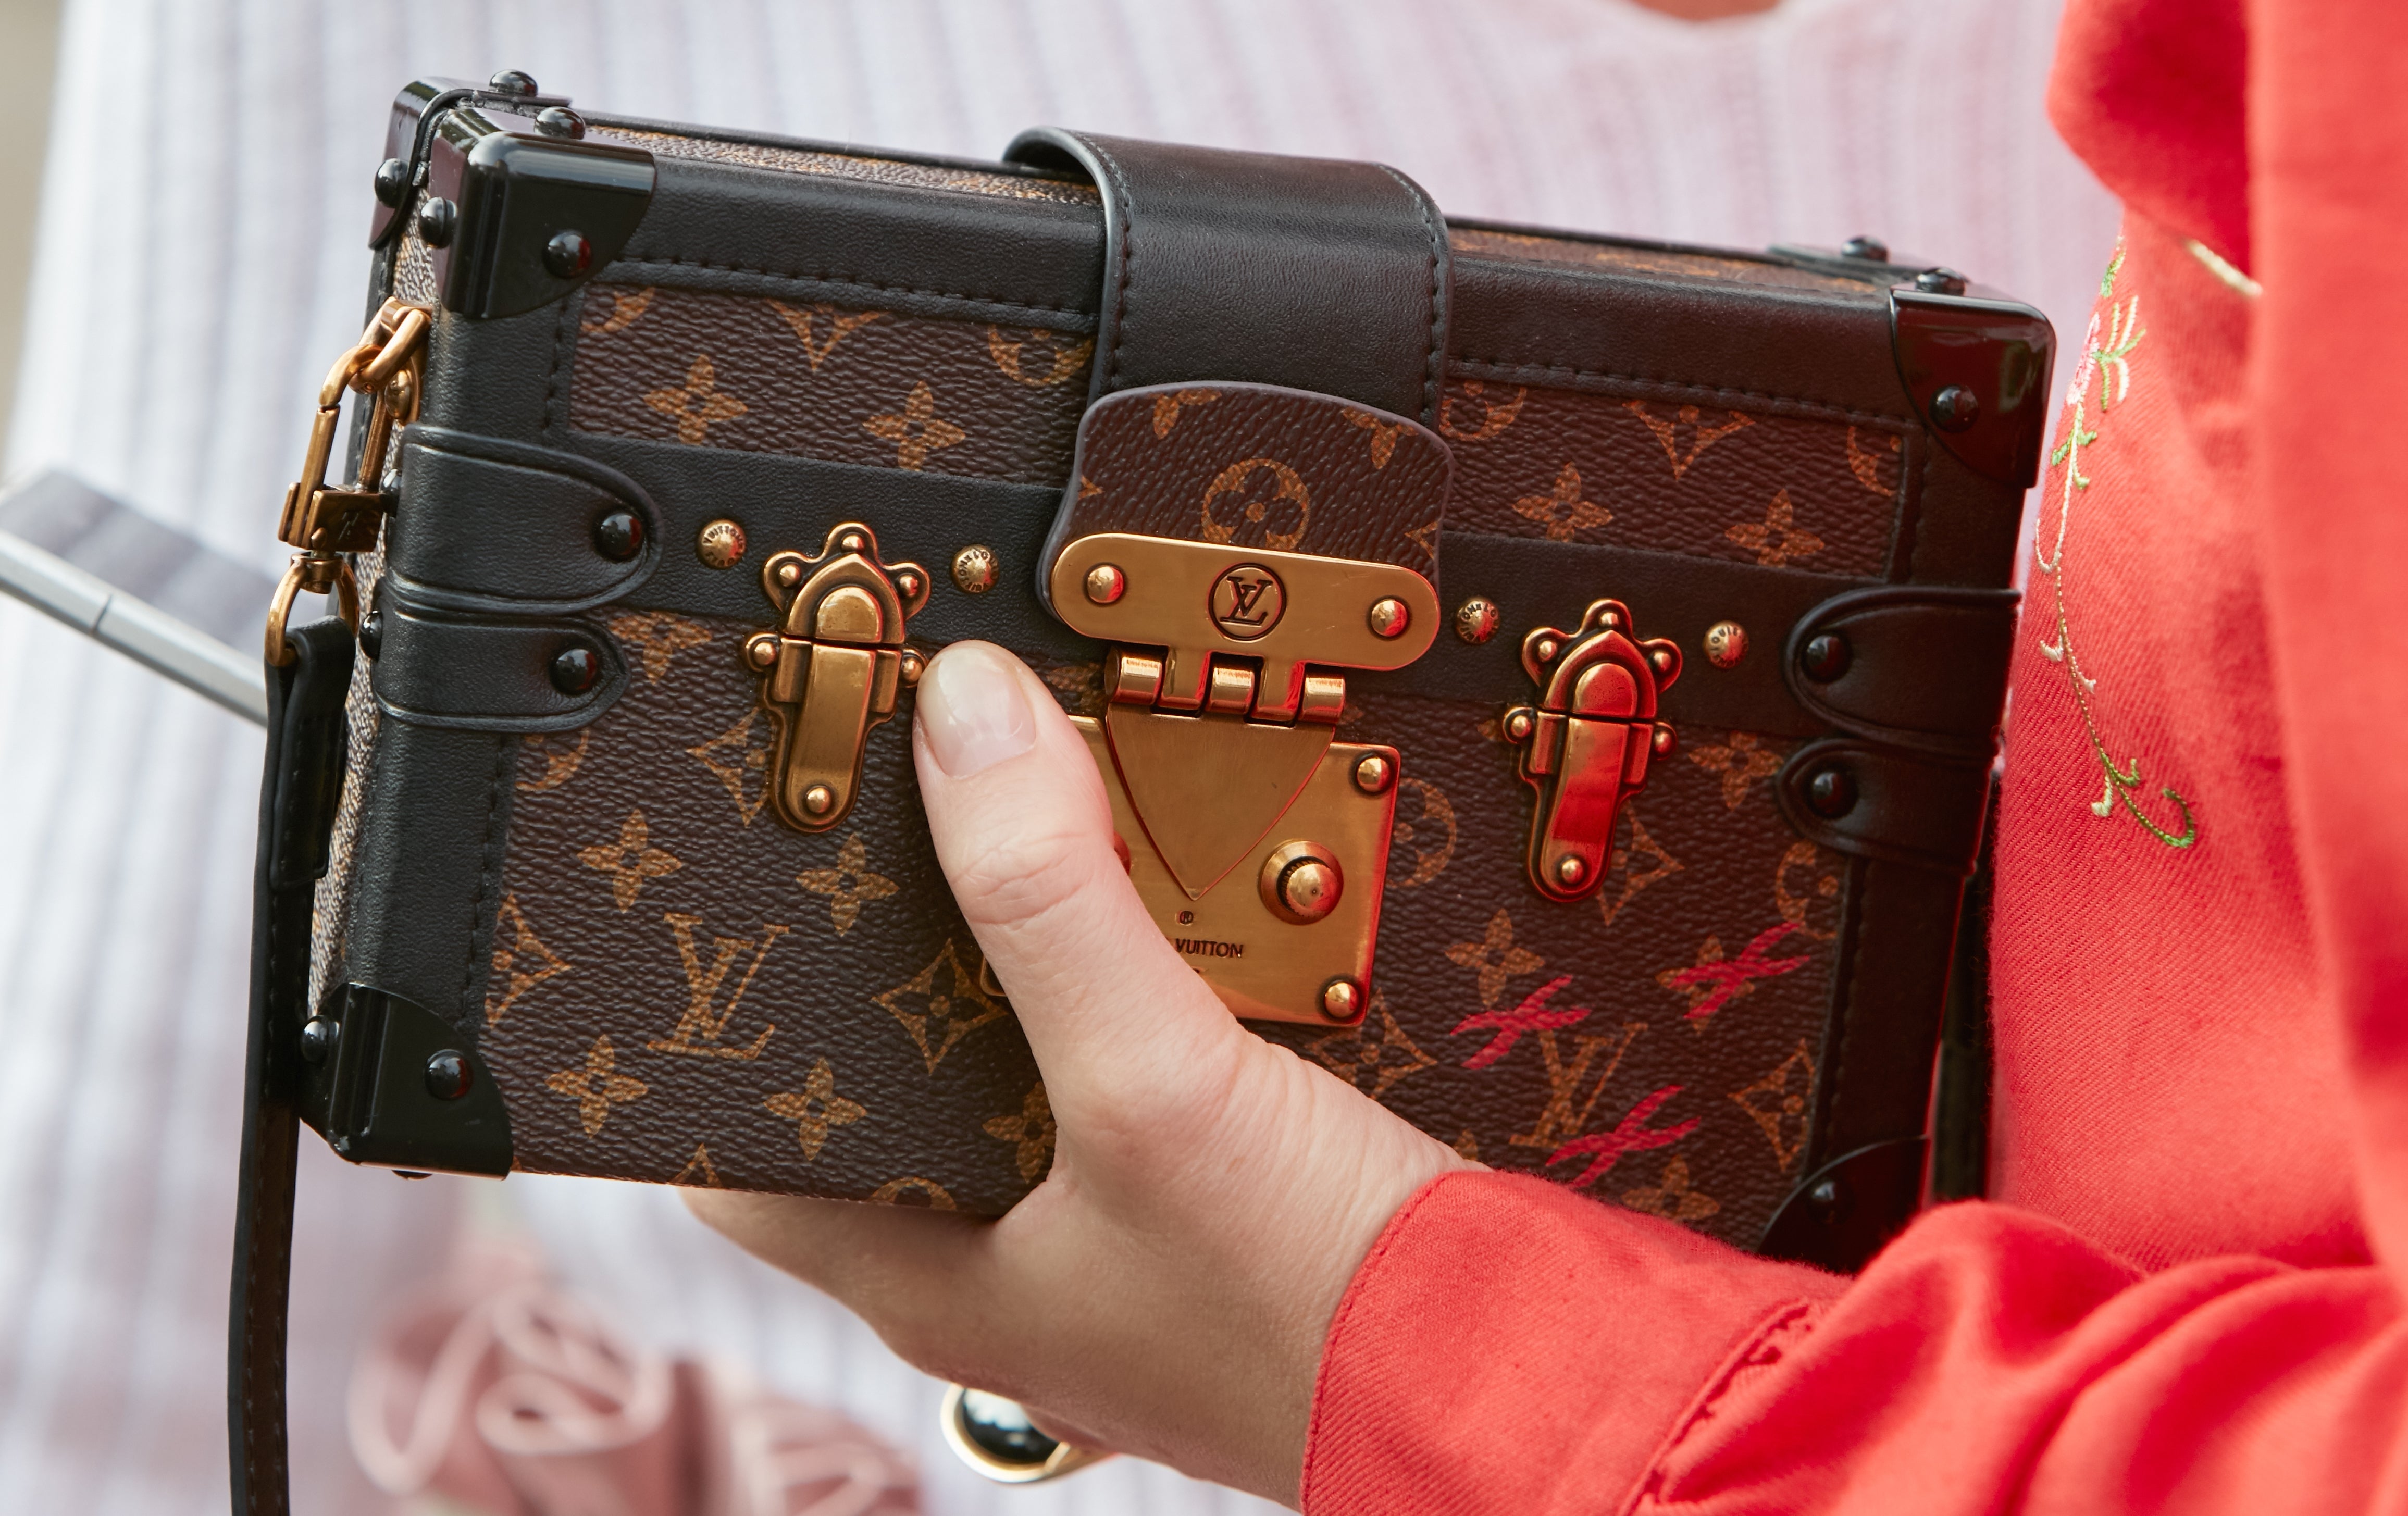 EVERYTHING YOU NEED TO KNOW ABOUT LOUIS VUITTON'S DATE CODES